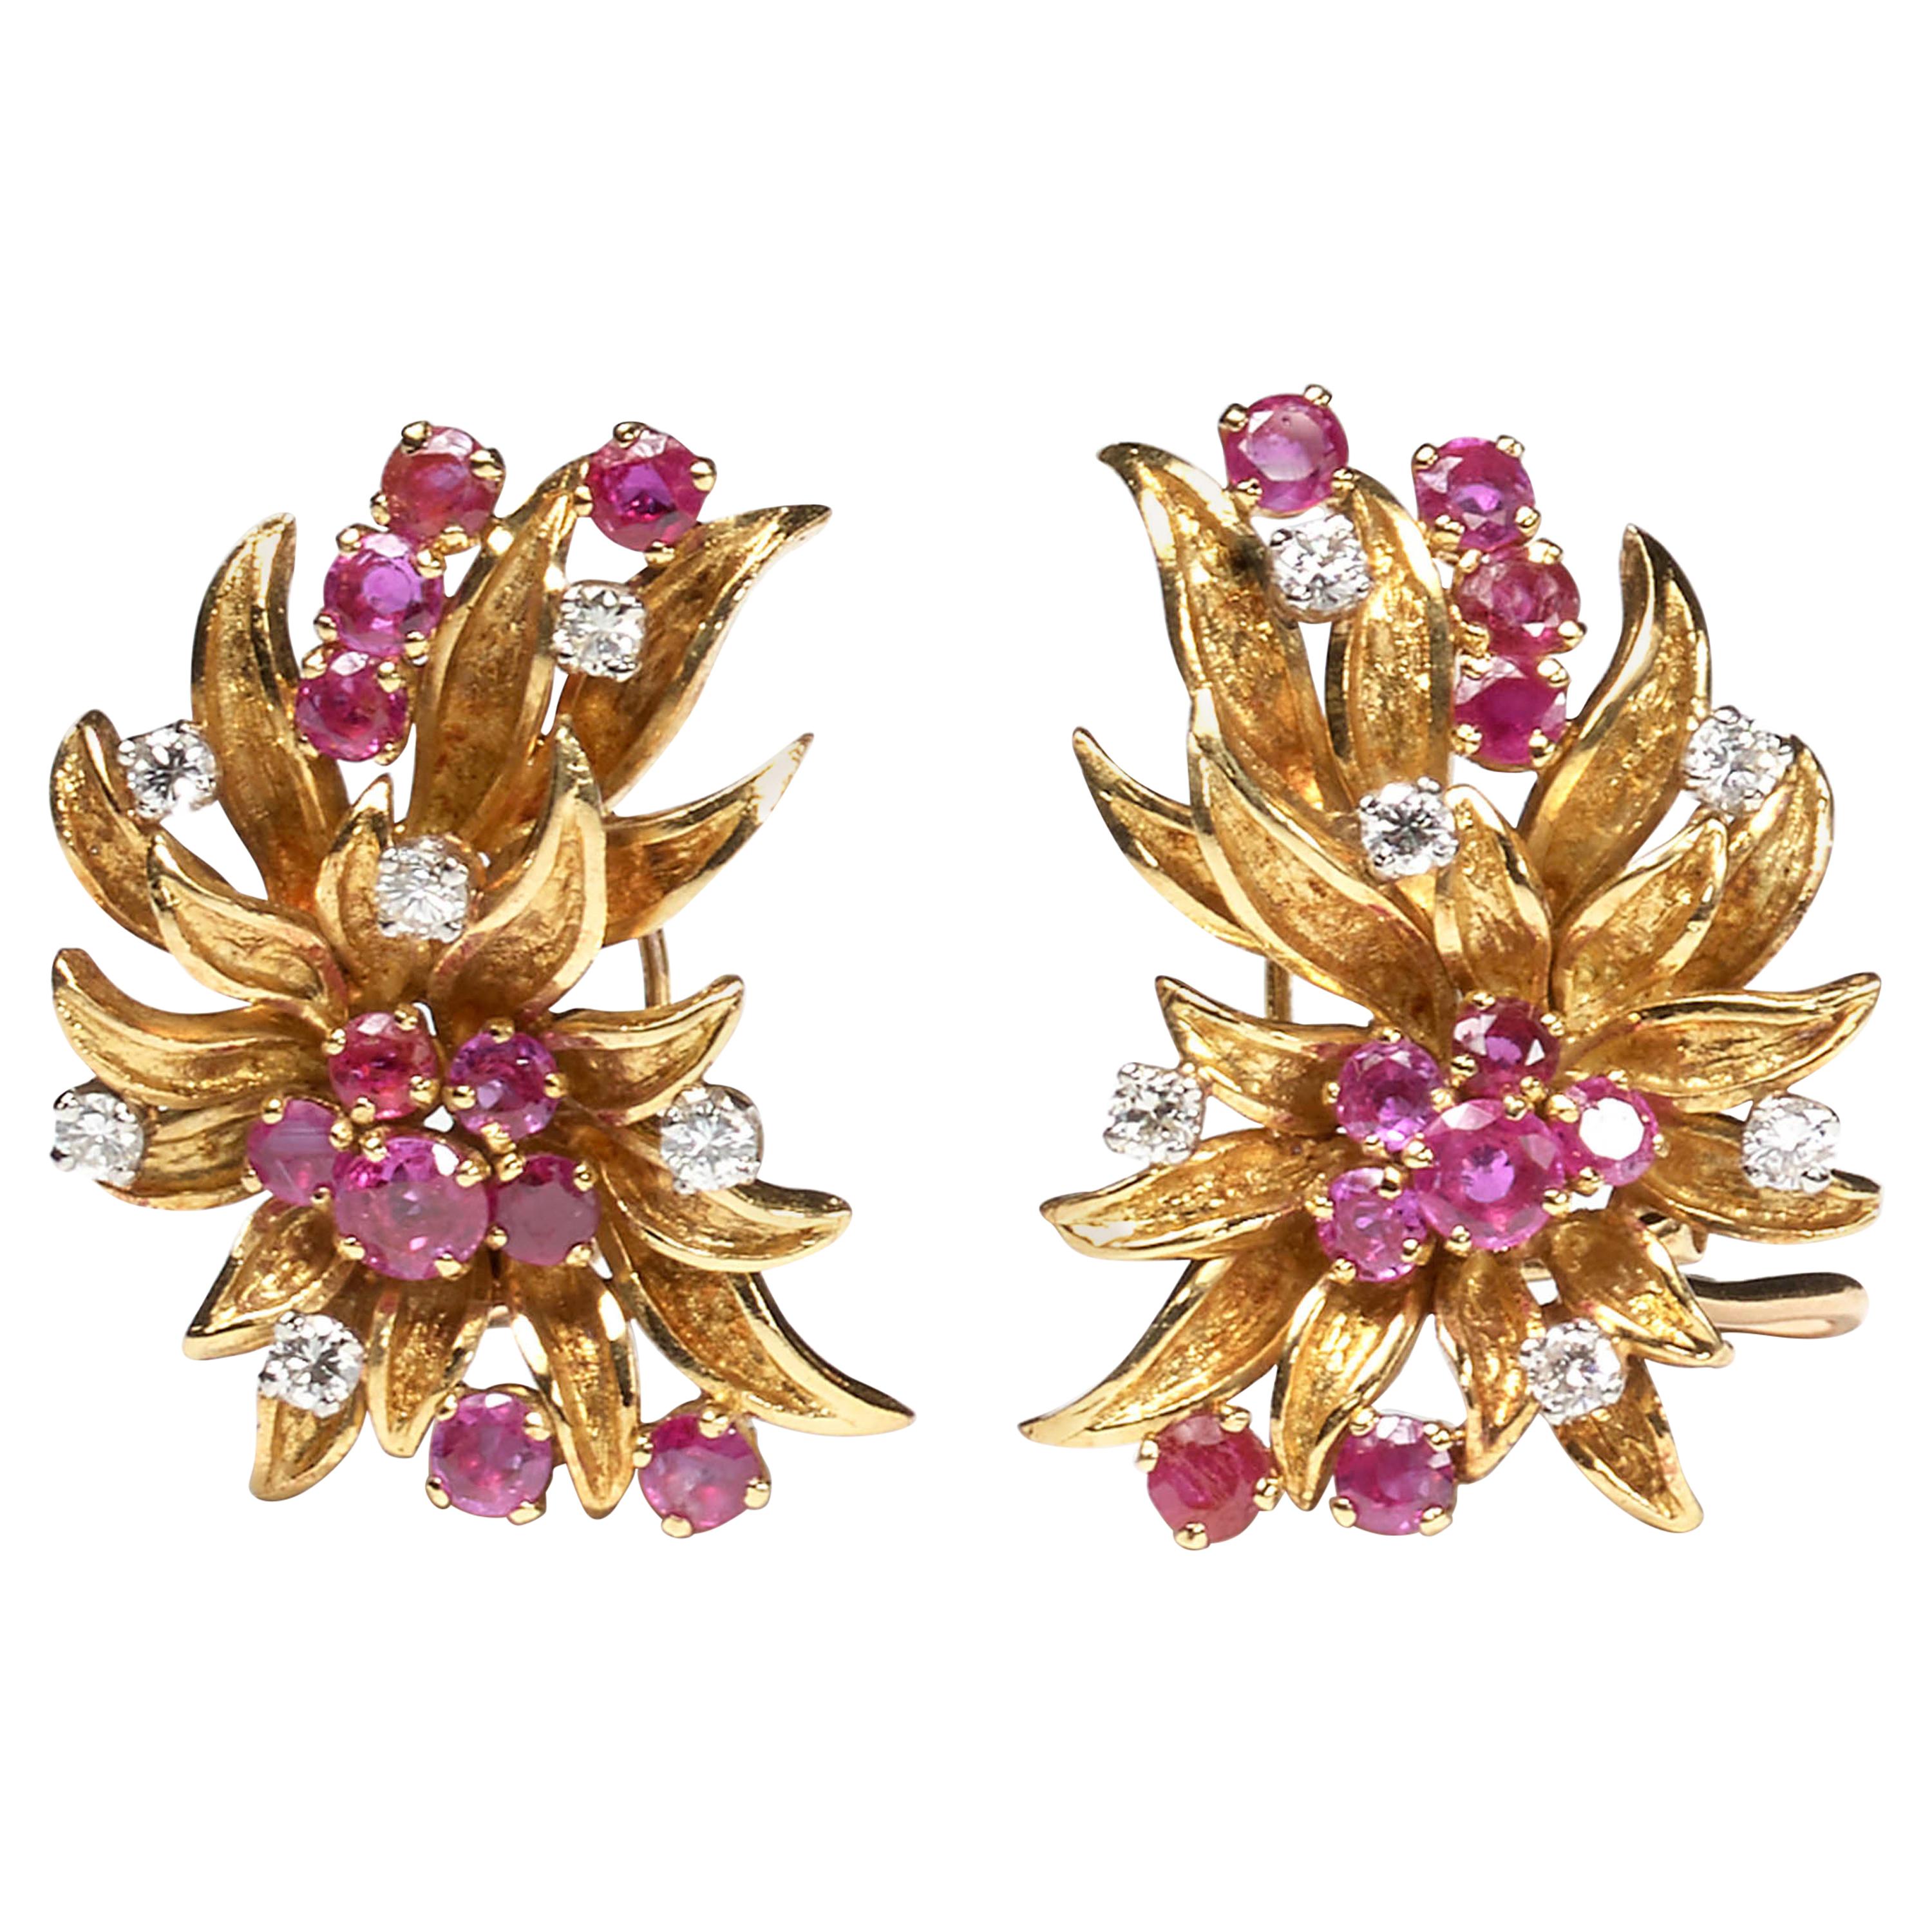 Vintage Ruby and Diamond Floral Earrings